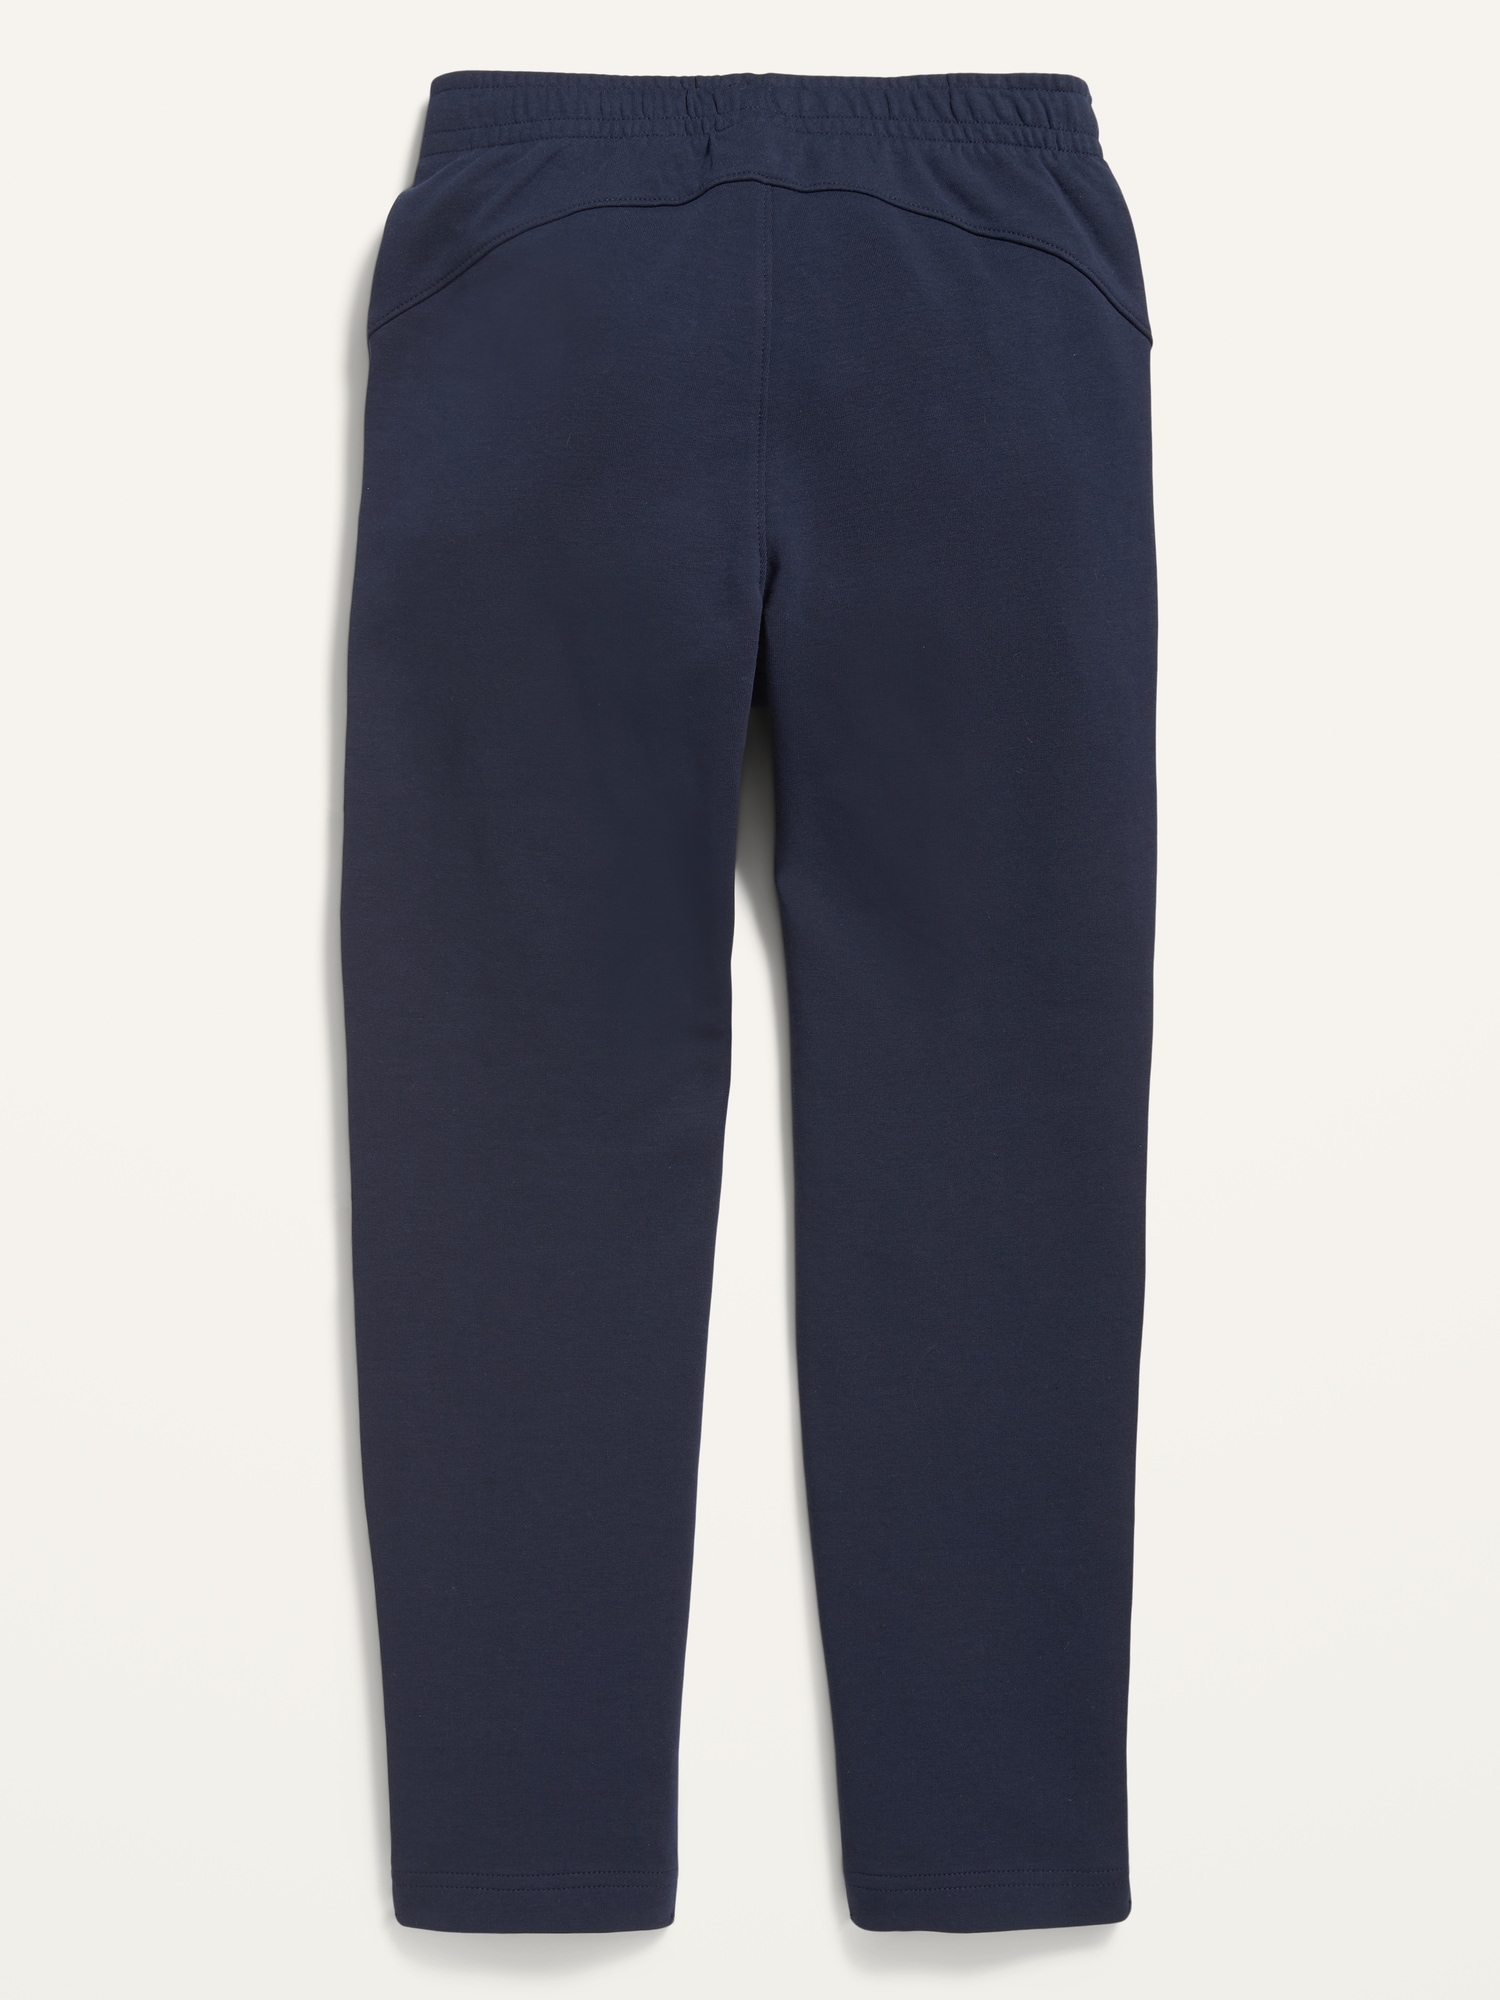 Dynamic Fleece Tapered Sweatpants for Boys | Old Navy